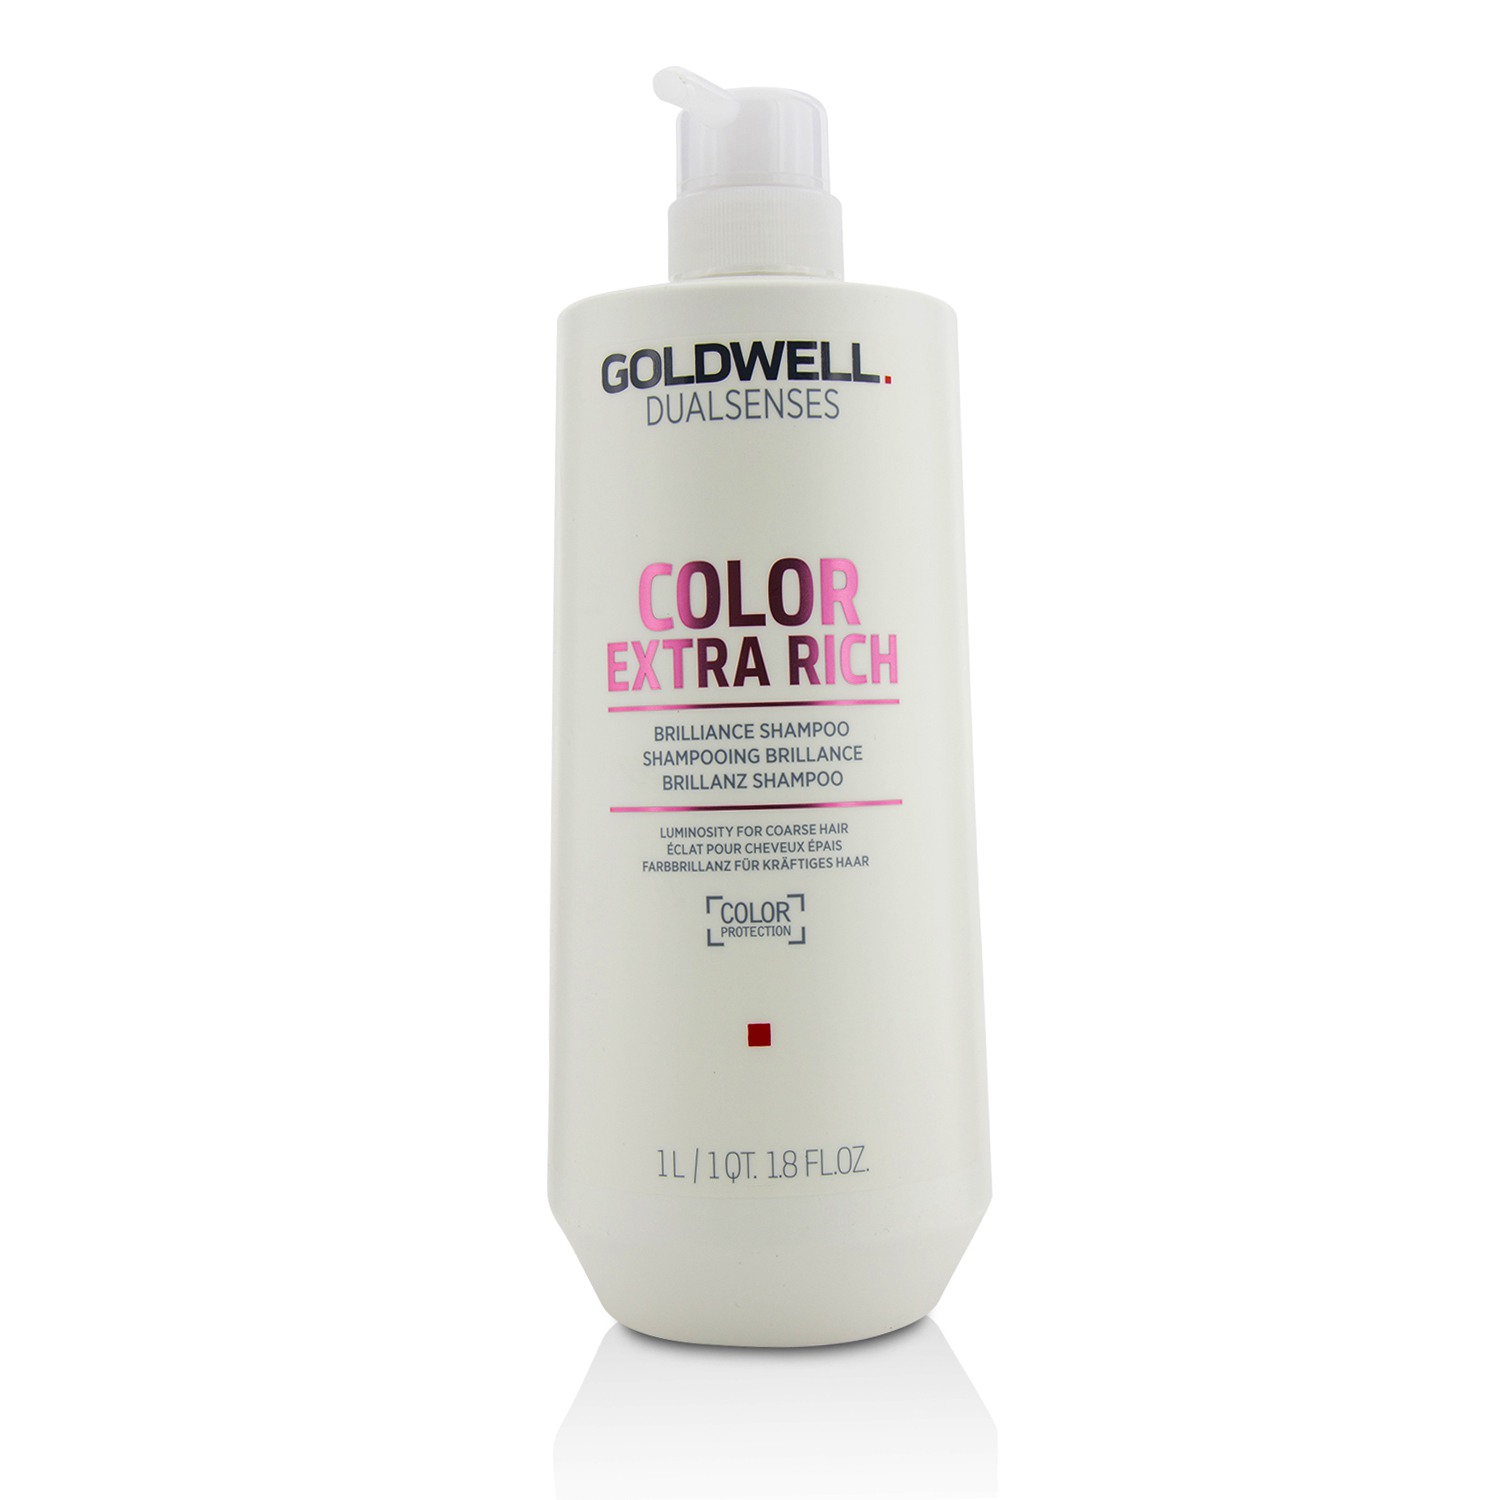 Dual Senses Color Extra Rich Brilliance Shampoo (Luminosity For Coarse Hair) Goldwell Image